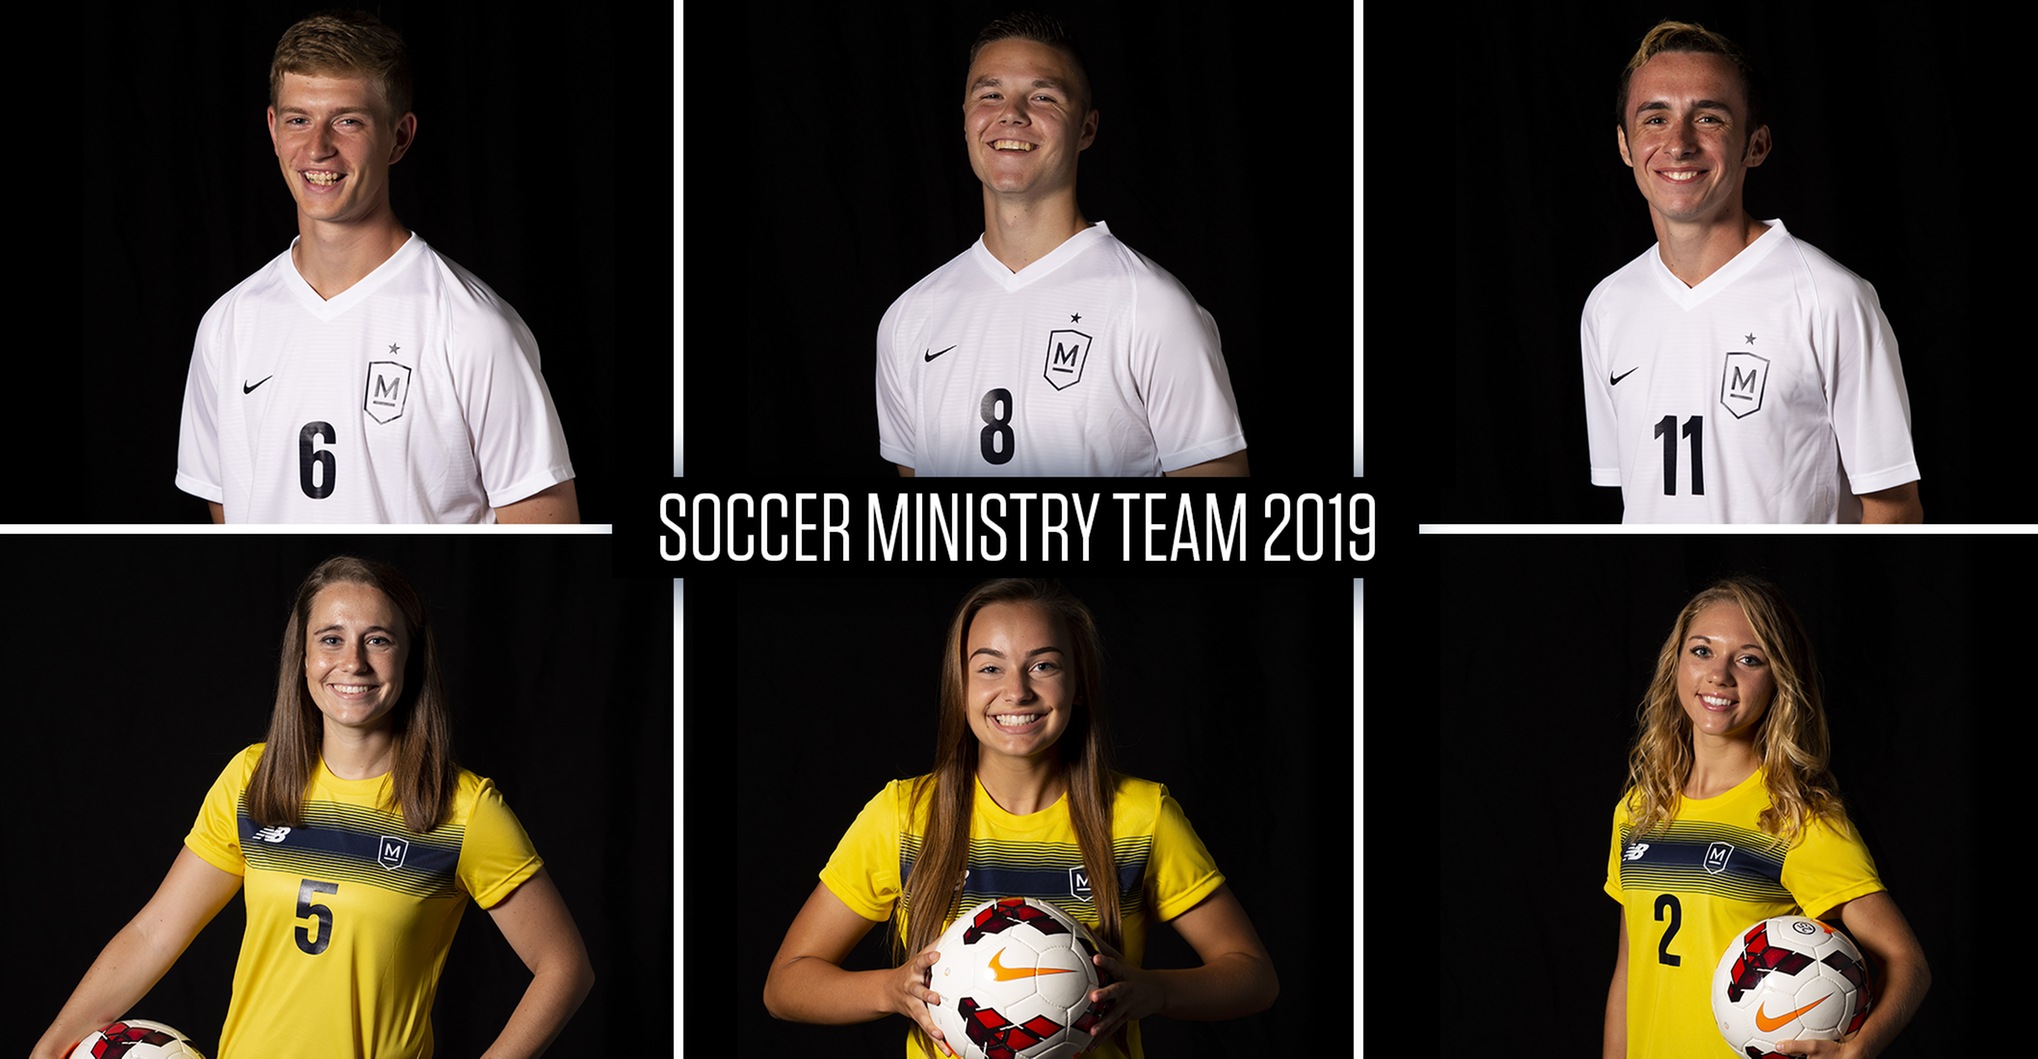 Soccer Ministry Team 2019 Overview